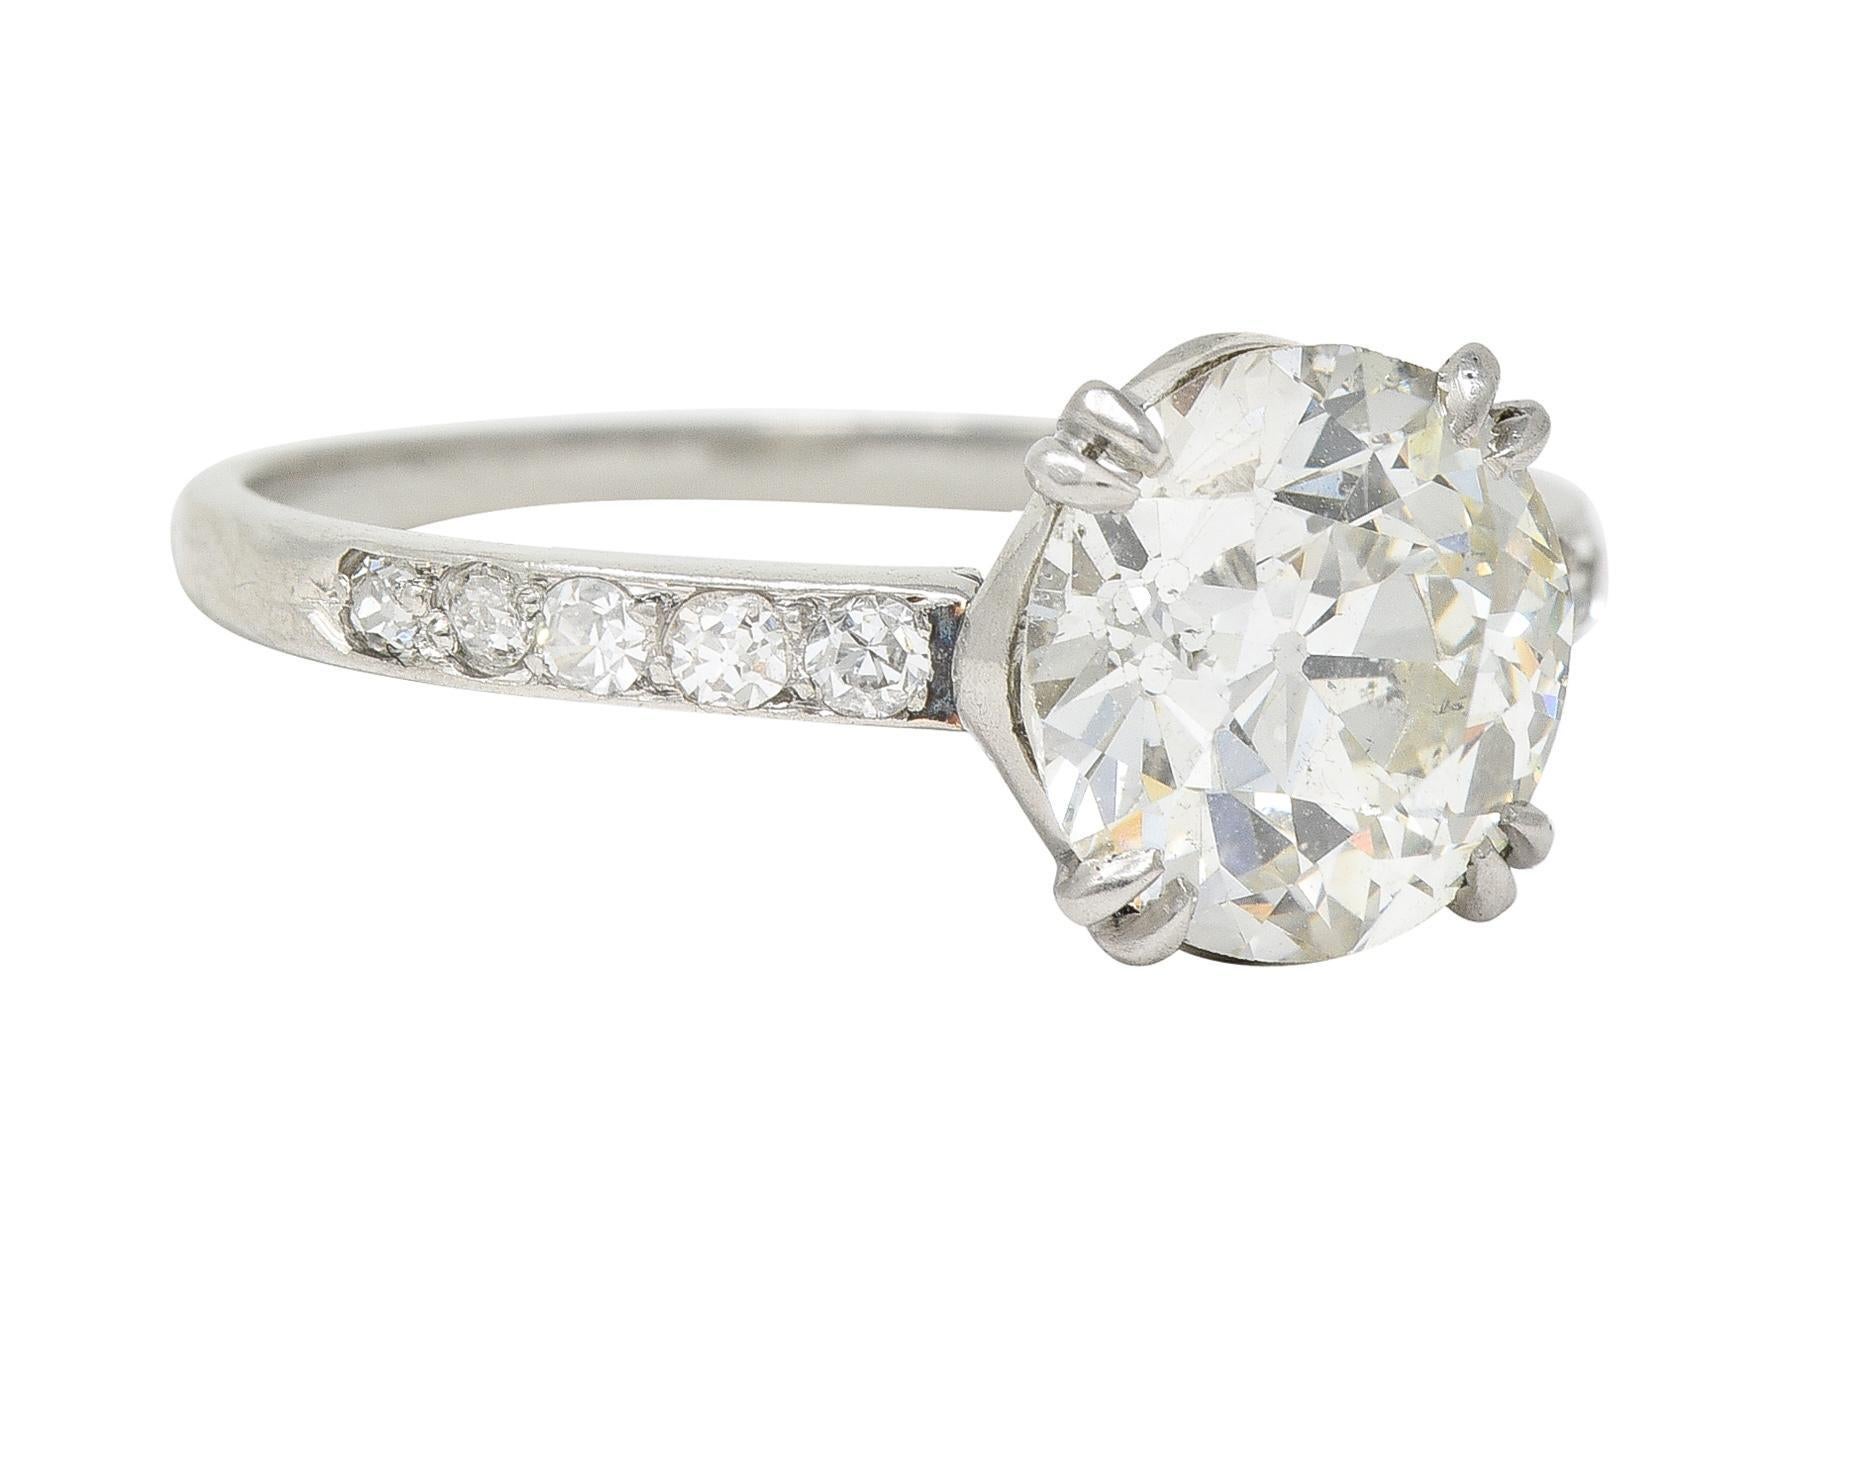 Centering an old European cut diamond weighing 1.96 carats - J color with SI2 clarity
Set with split talon prongs in a basket and flanked by single-cut diamonds 
Bead set in rows and weighing approximately 0.25 carat total
Eye clean and bright